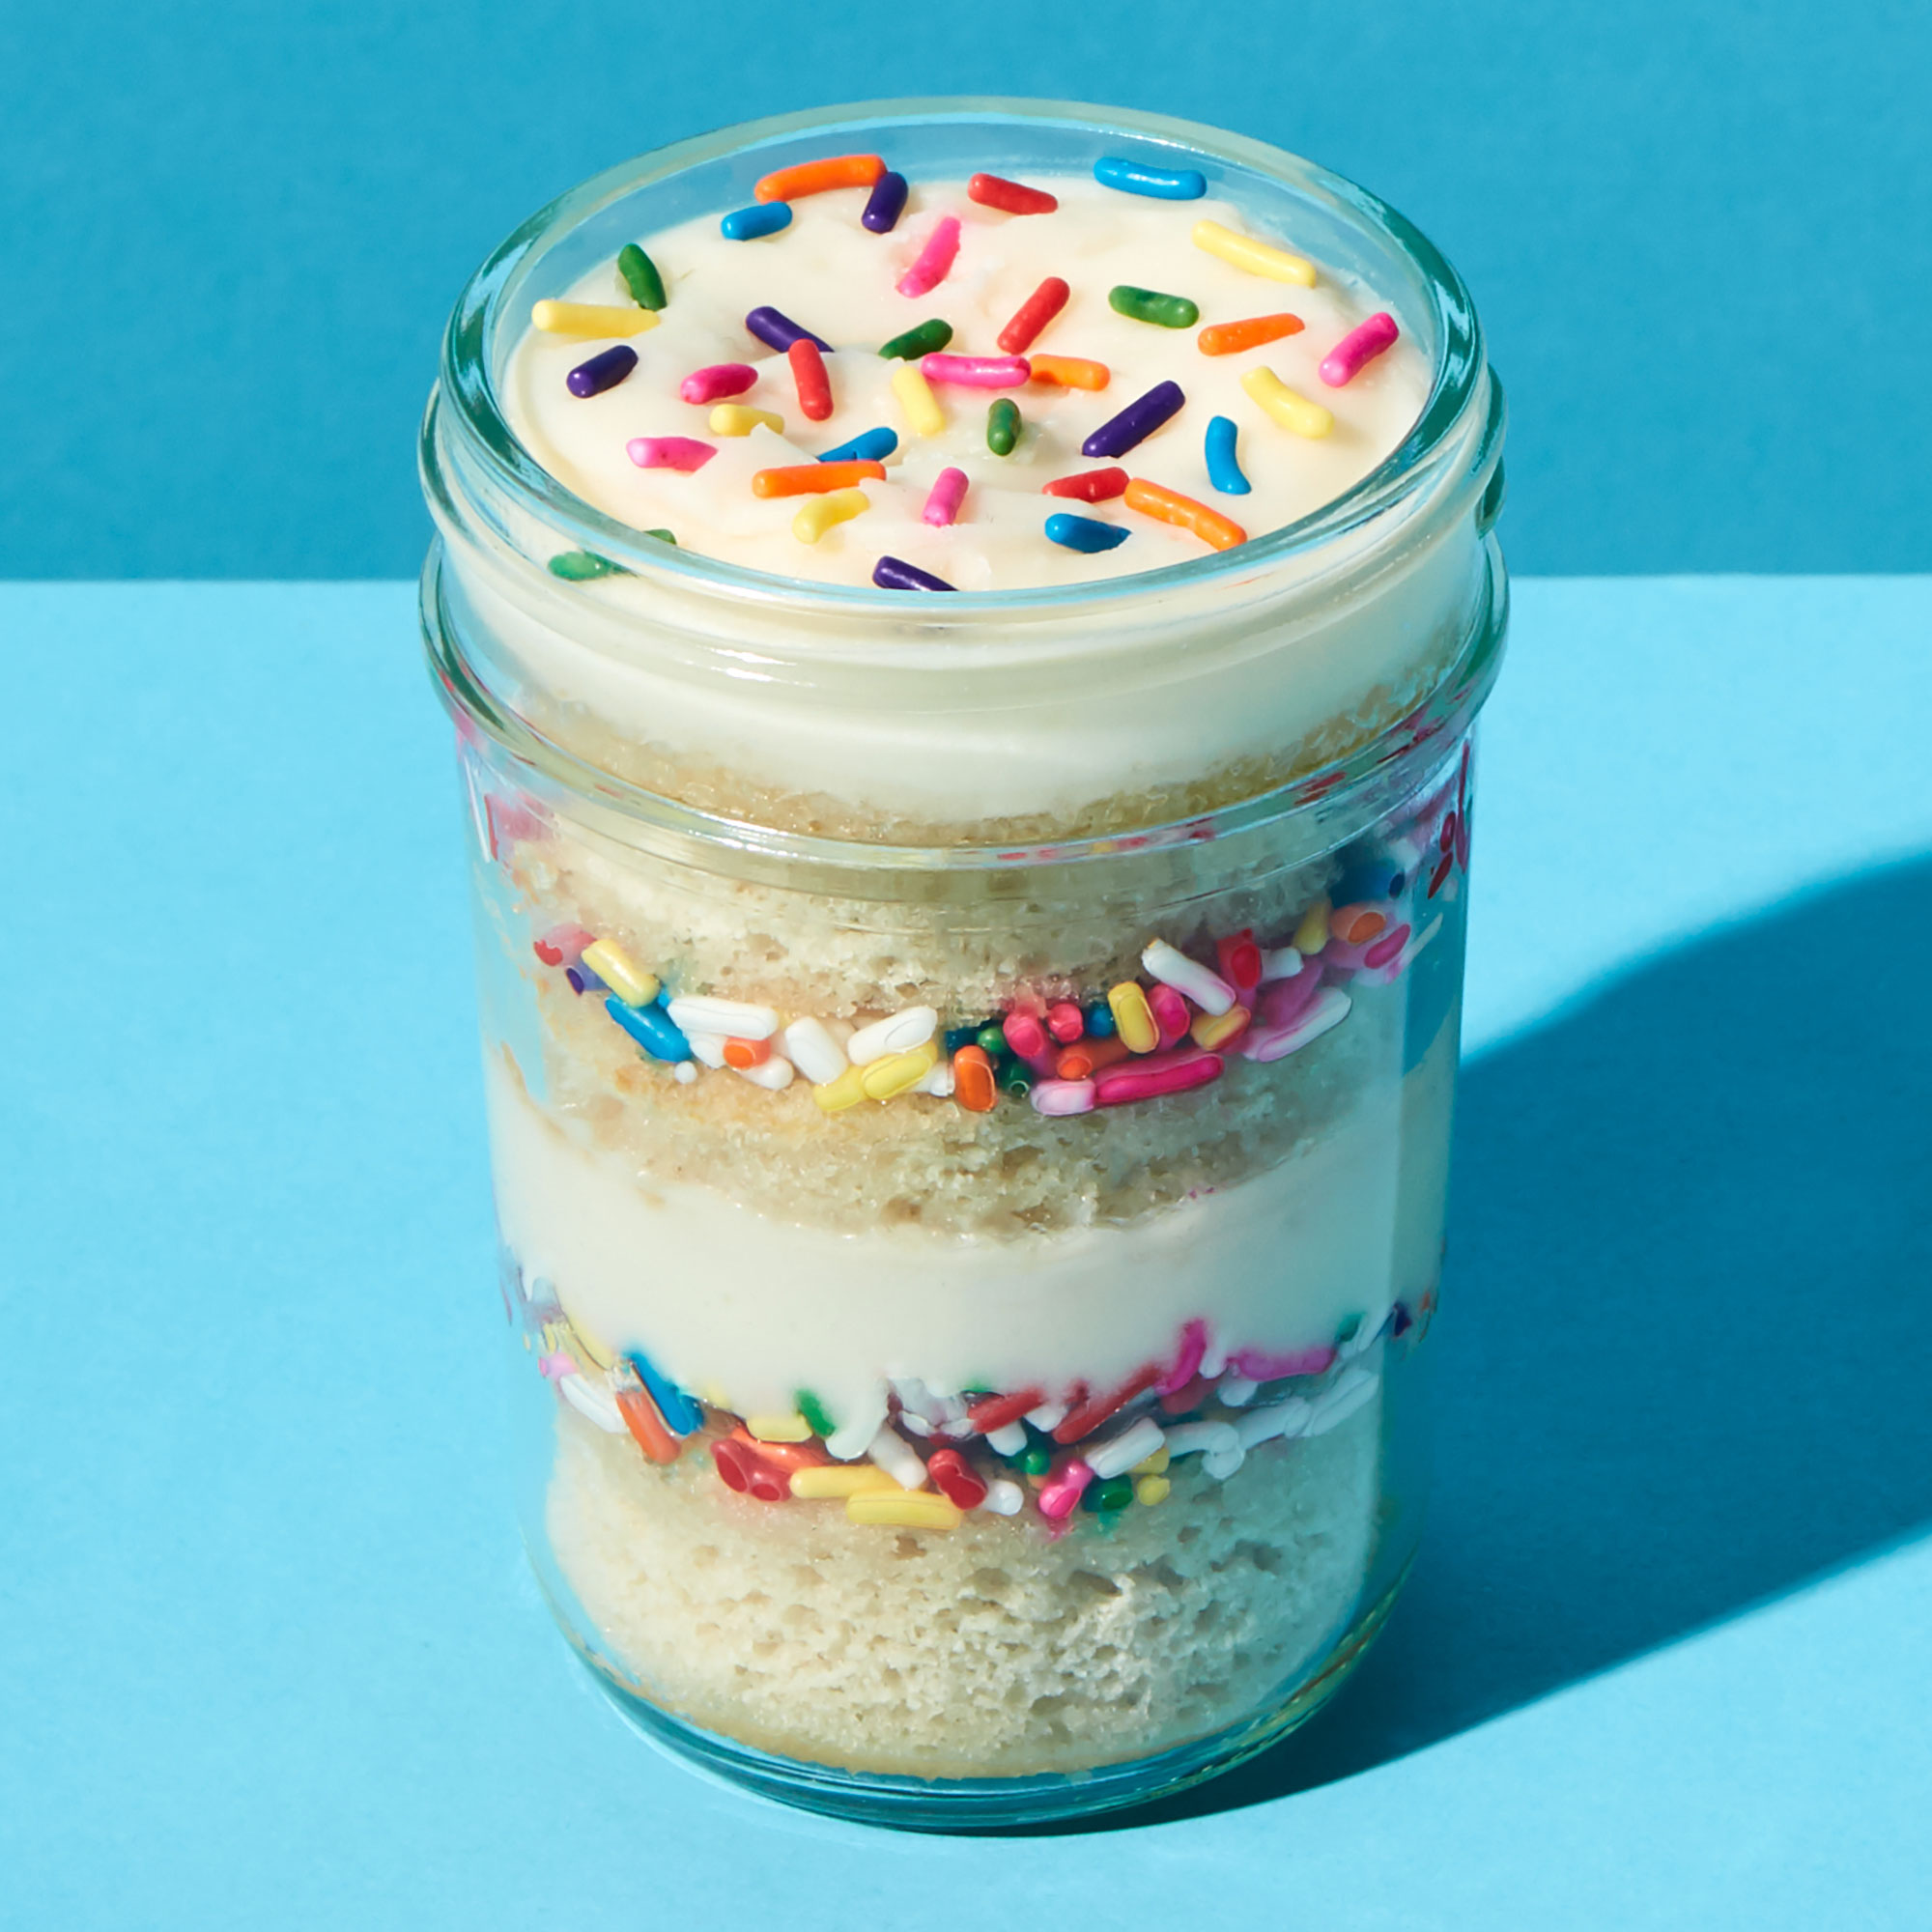 Katy's Kitchen: Cake Jars for a limited time!